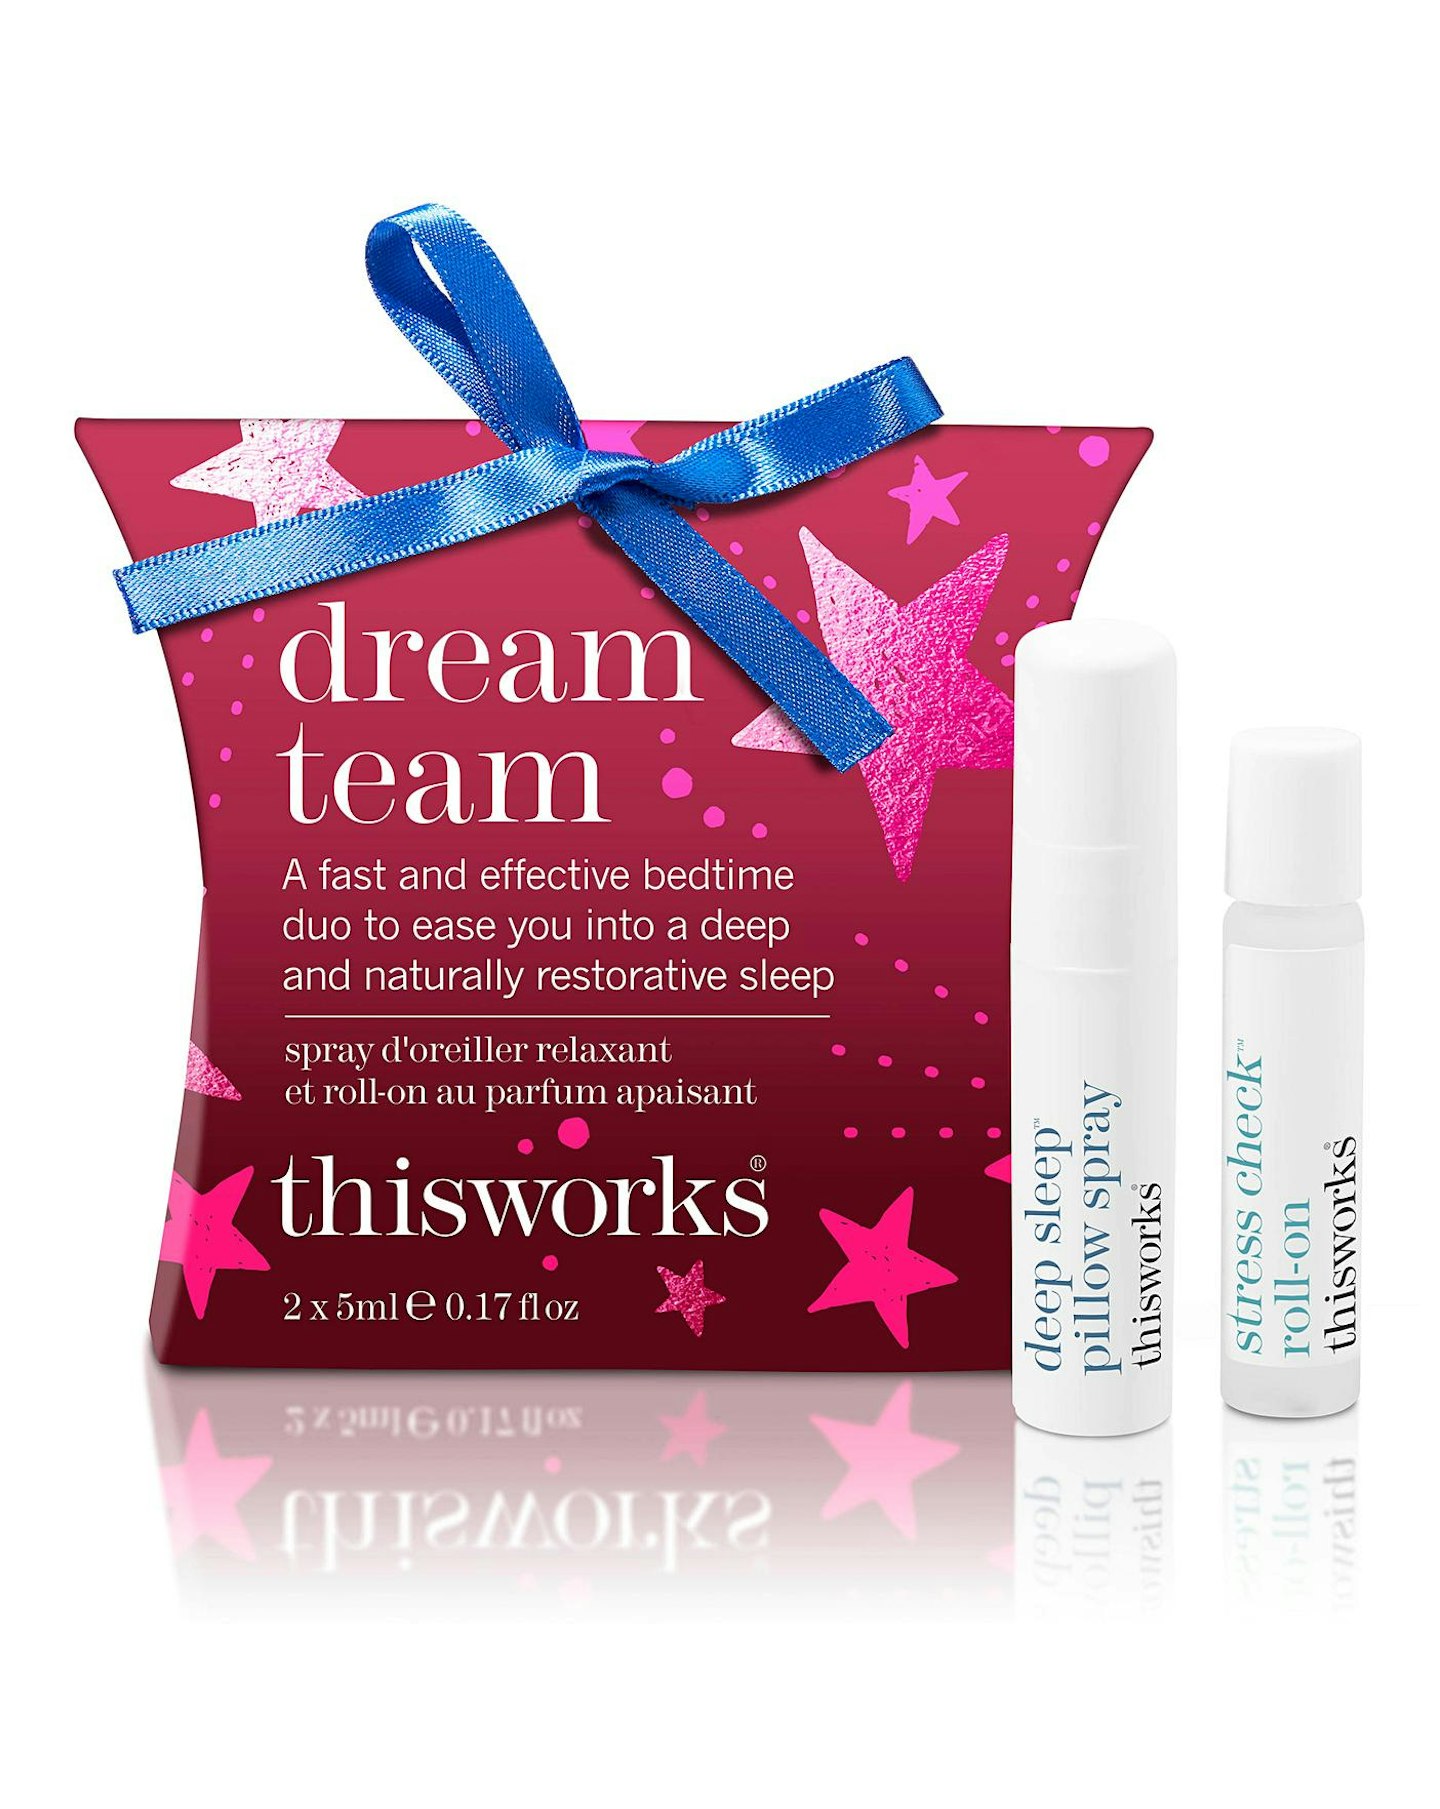 Dream Team by This Works, £10